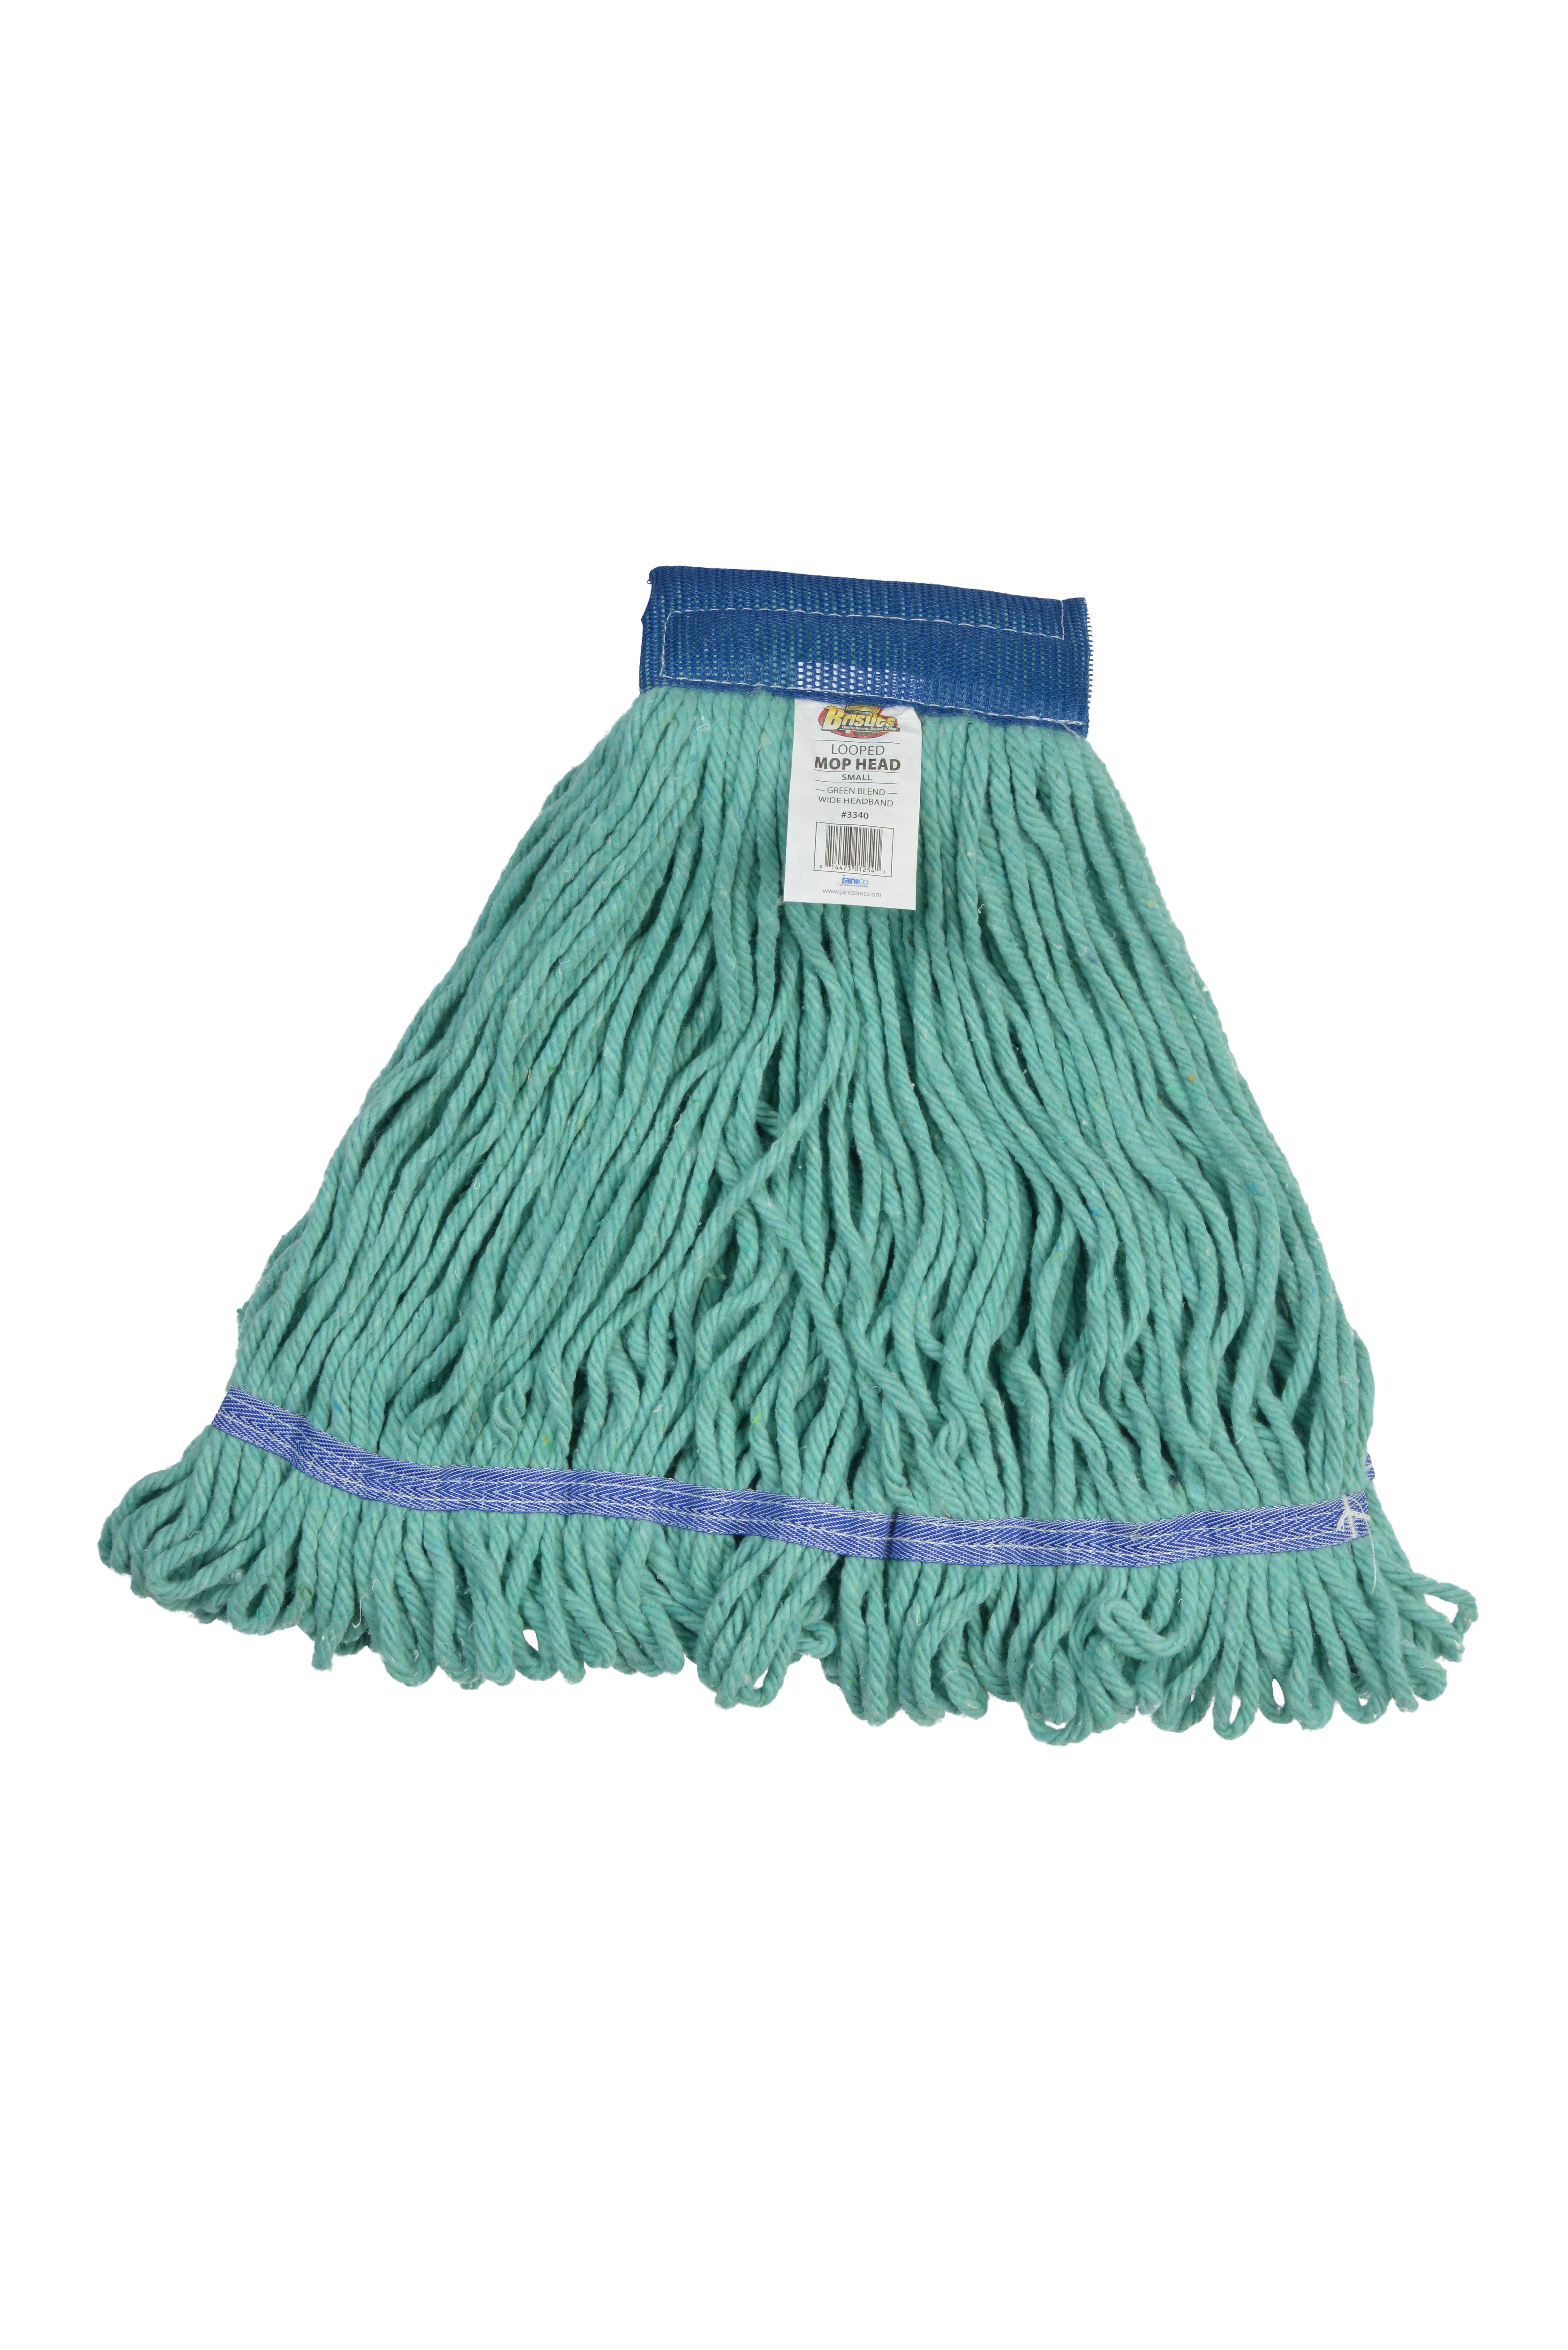 Mop Head Looped End Blended  Small 5&quot; Green 12/cs 3340